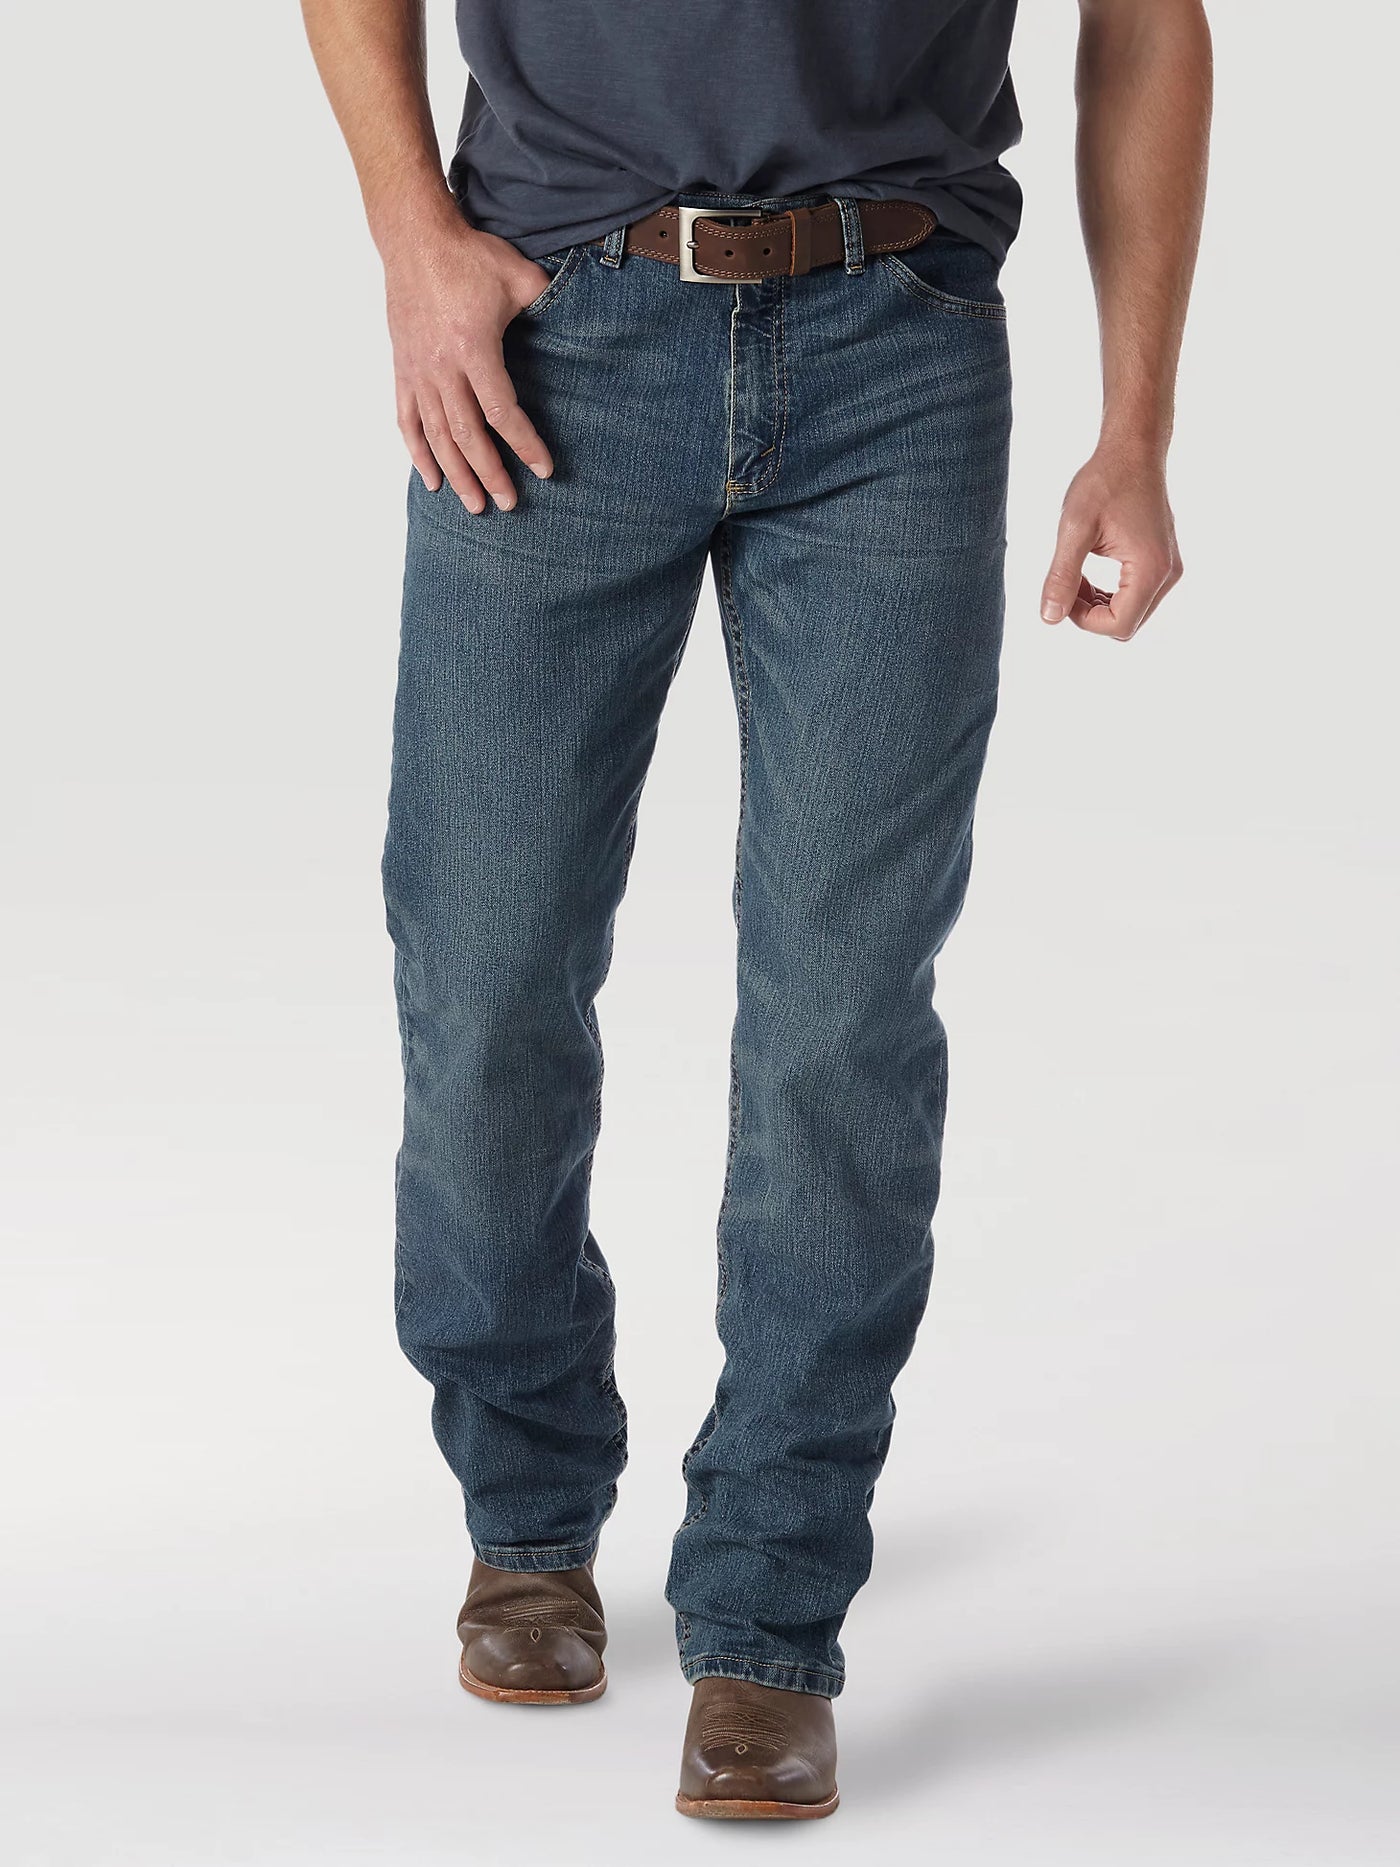 Wrangler Men's 20X 01 Competition Relaxed Jeans-Barrel